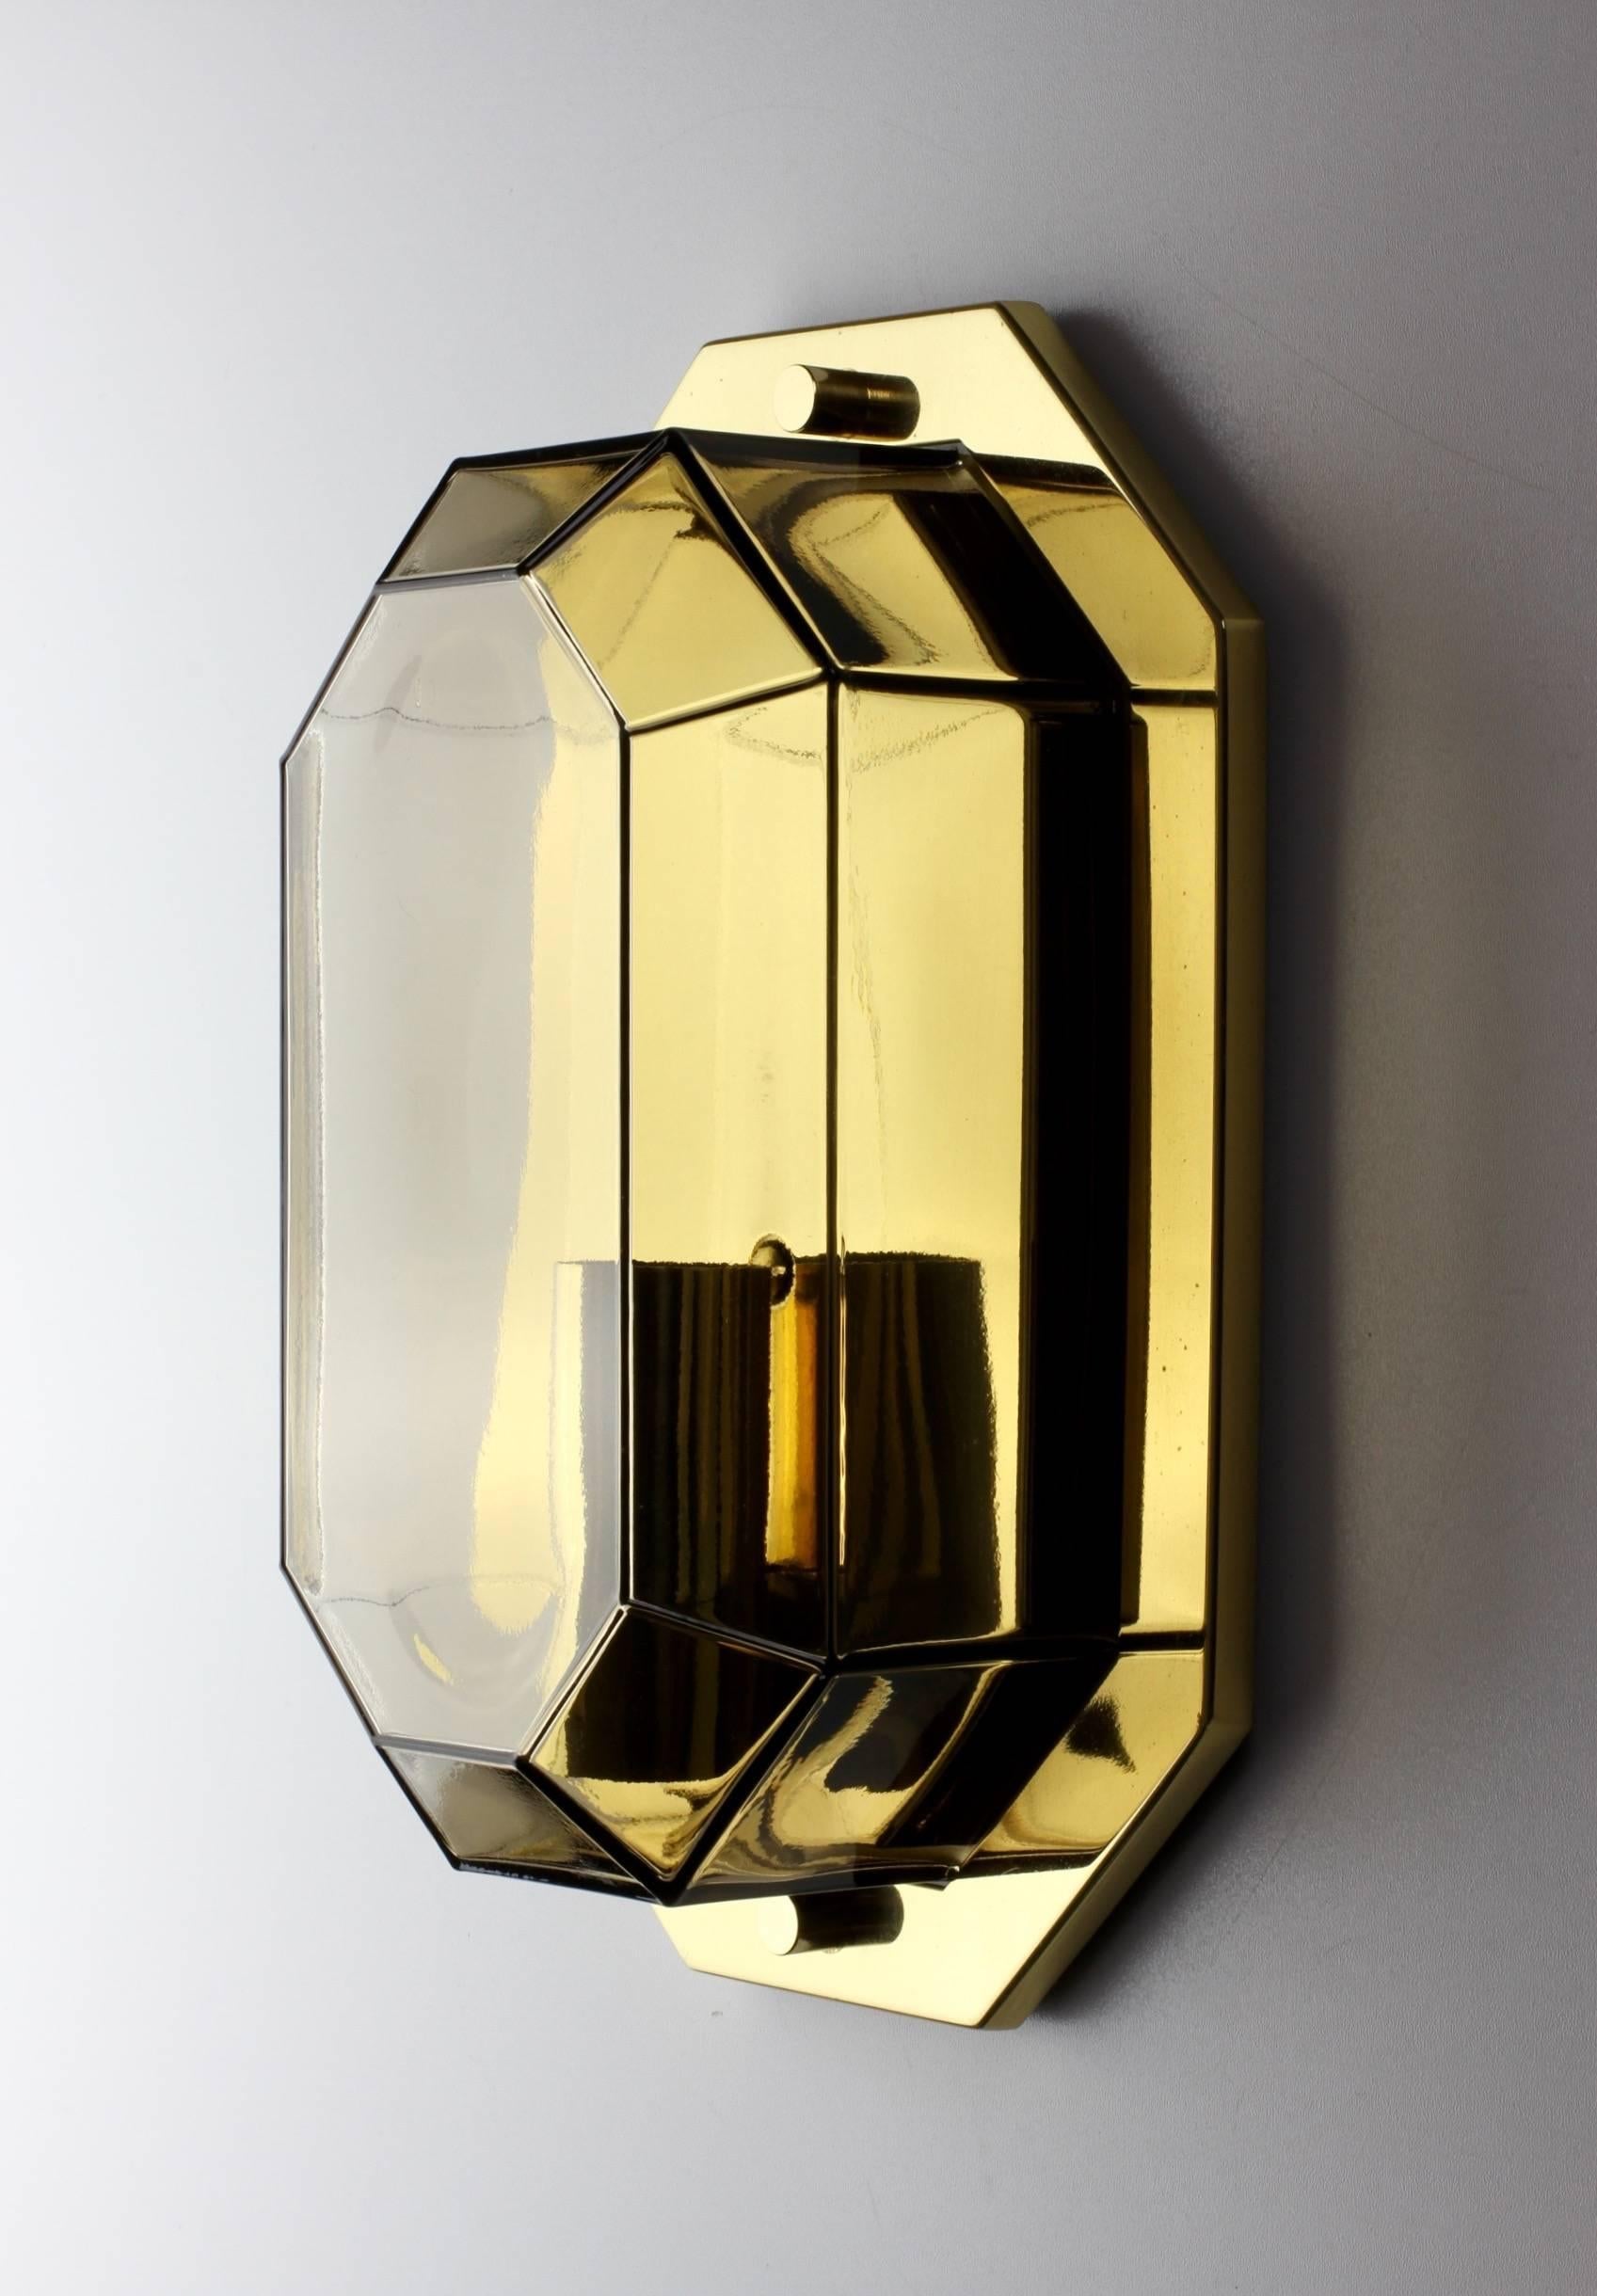 One of four stunning and elegant vintage Lozenge shaped wall lights by Glashütte Limburg, circa 1975-1985. Featuring geometric shaped mouth blown smoked or tinted glass elements with polished brass cases or mounts.

Wall-mounted with flush mounts,